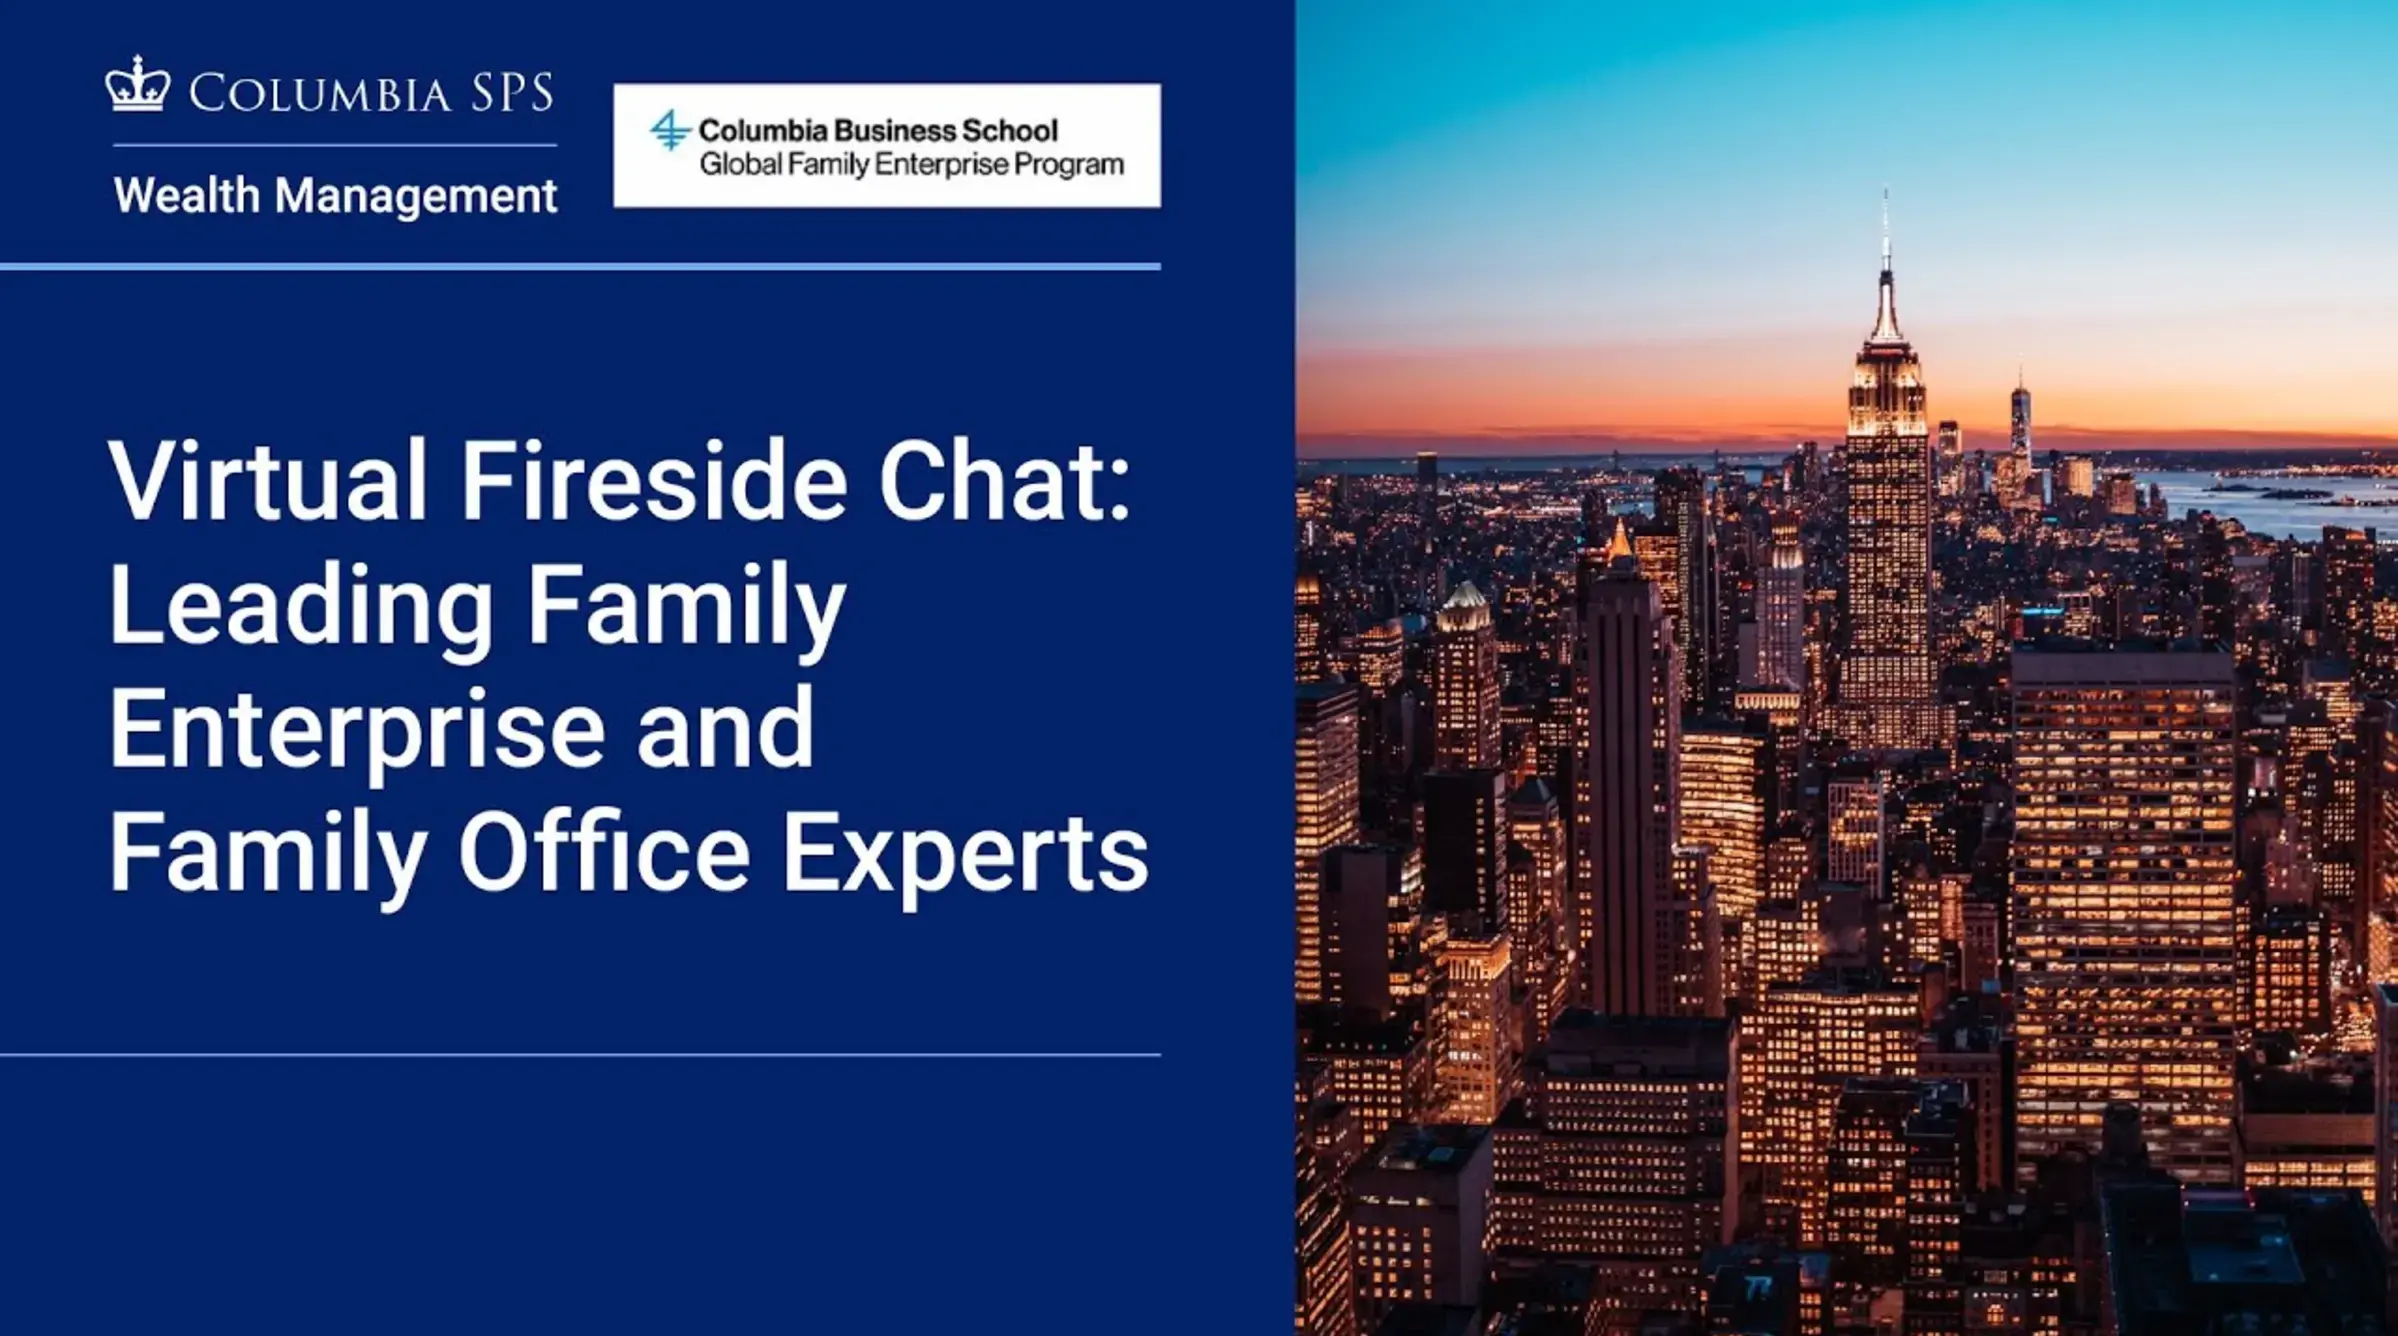 Virtual Fireside Chat with Leading Family Enterprise and Family Office Experts